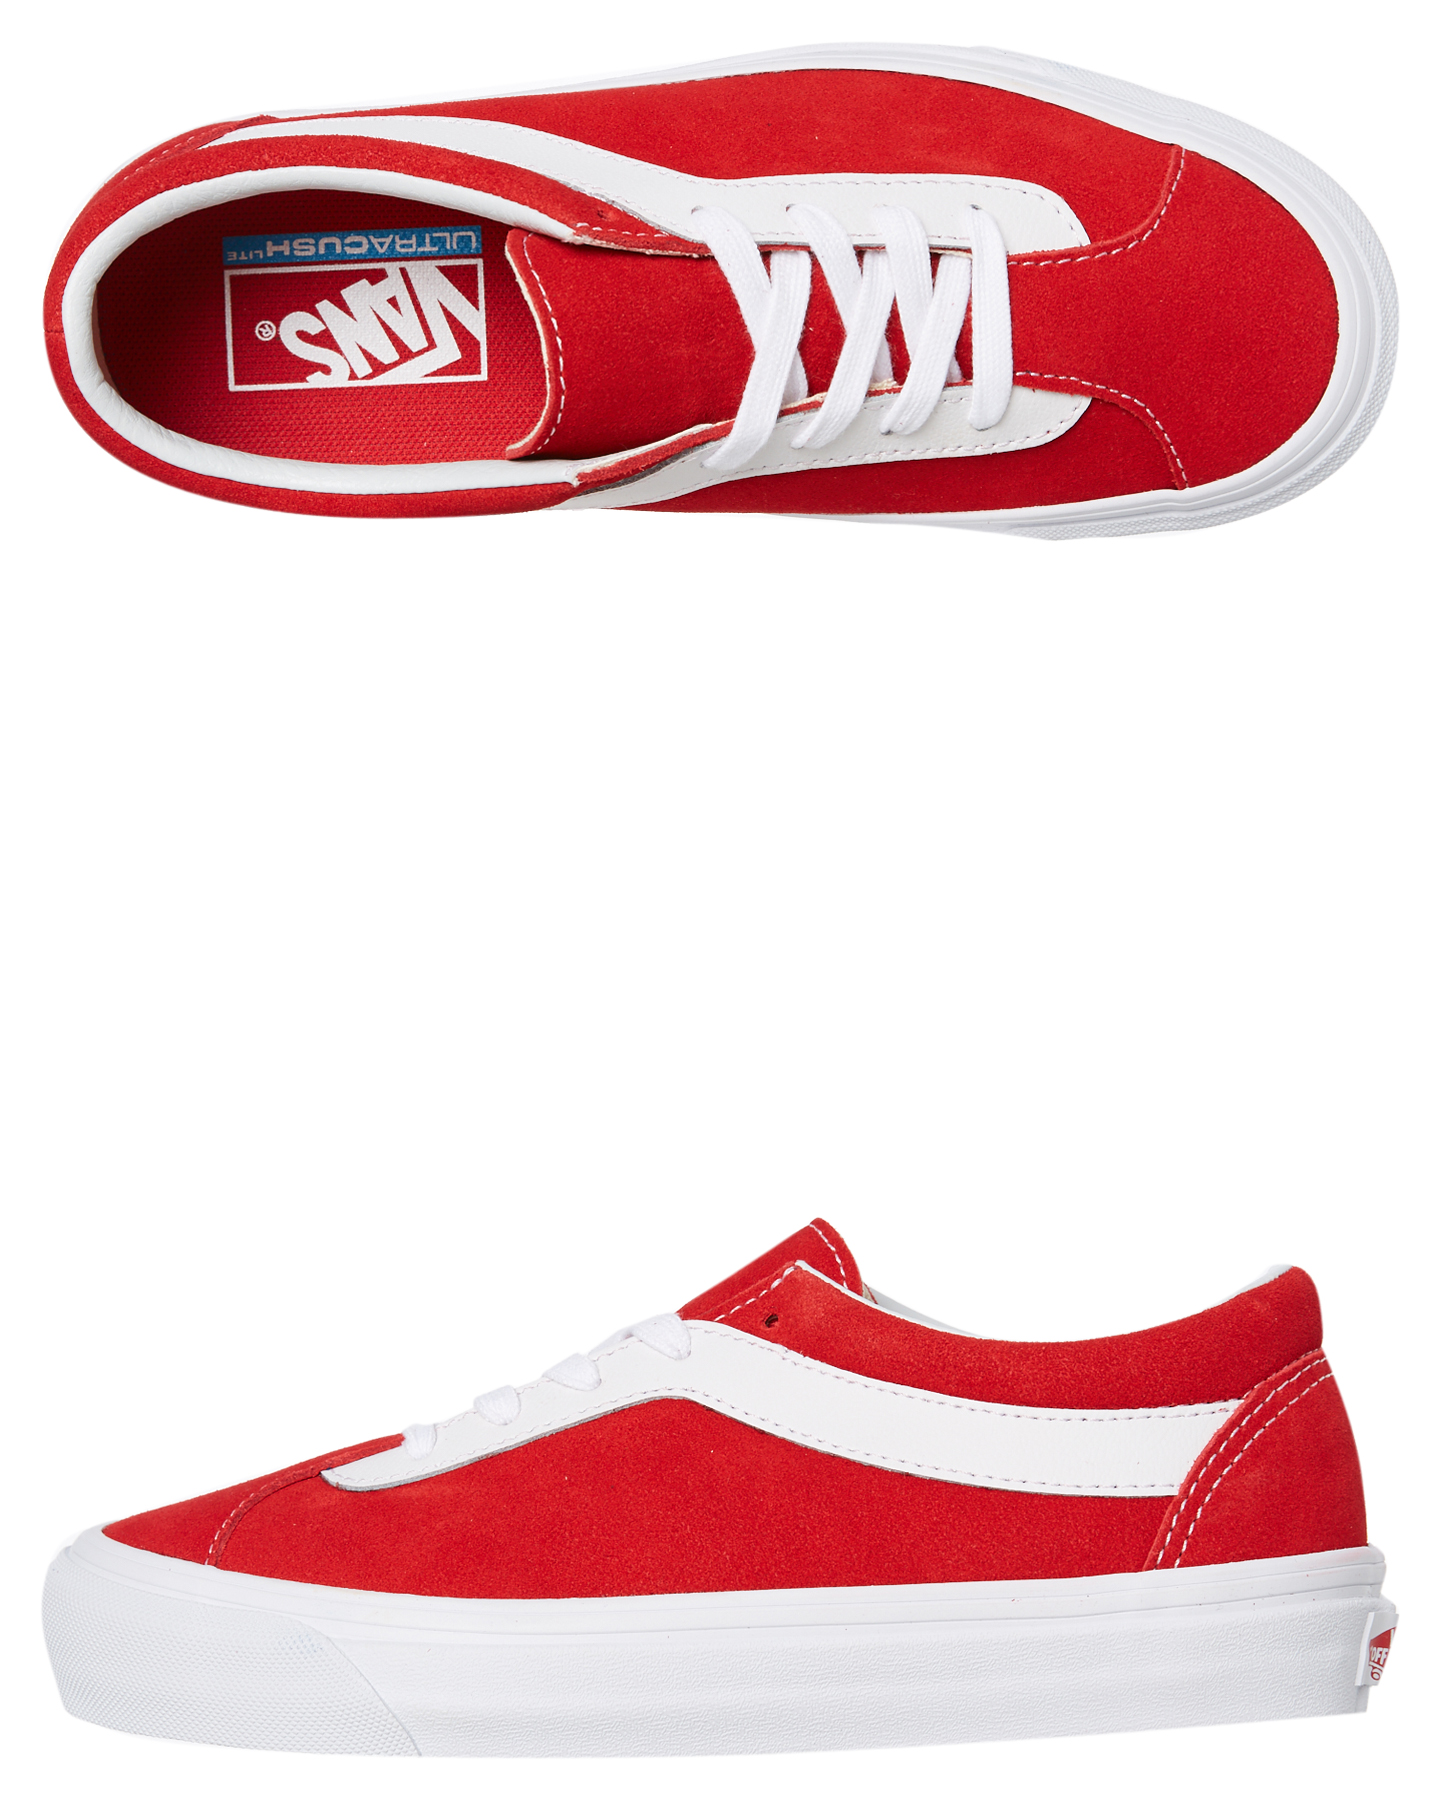 Vans Womens Bold Ni Shoe - Red | SurfStitch
 Red Vans Shoes For Girls